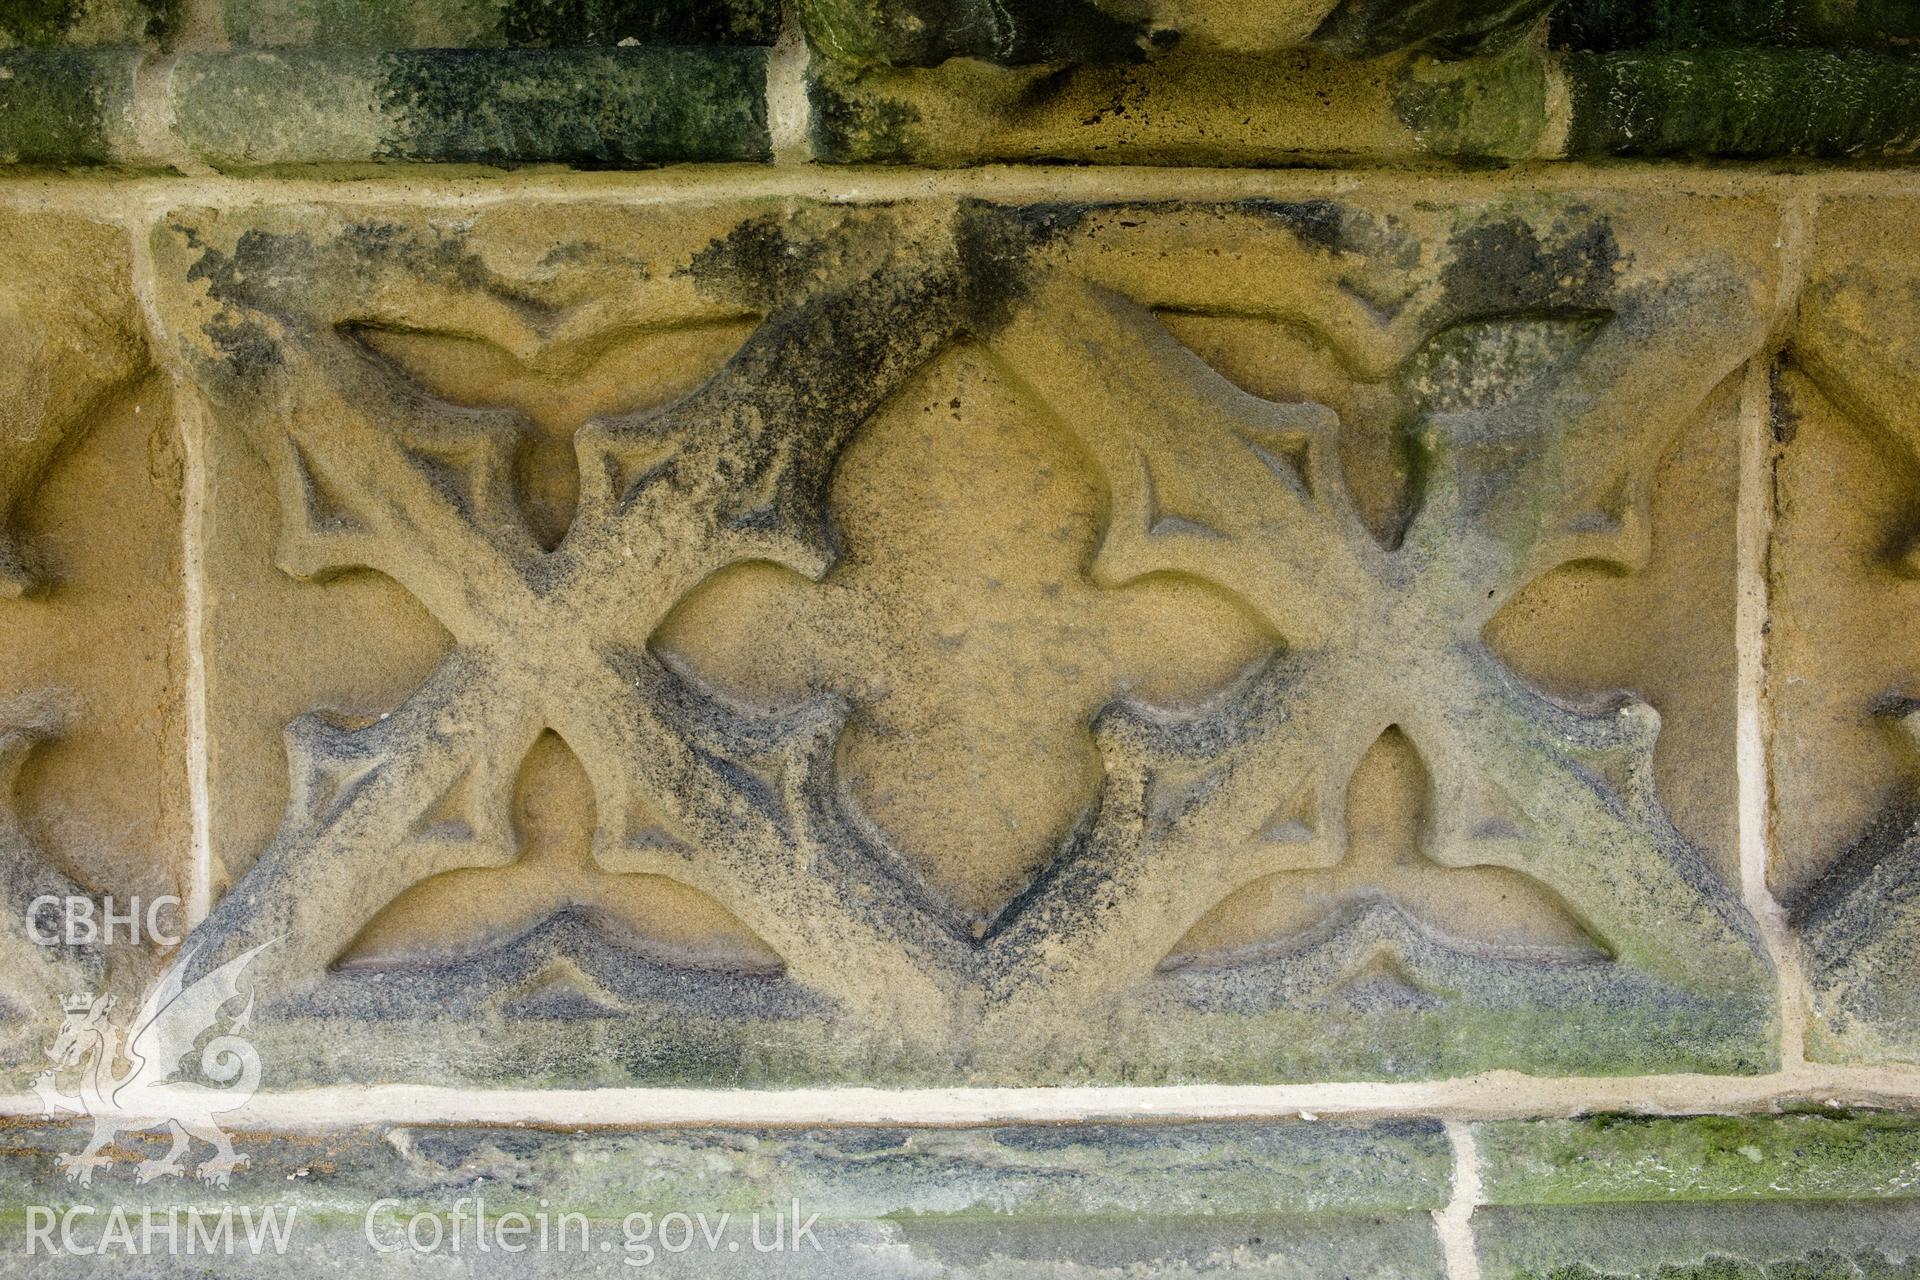 Stone carving below finials, moving clockwise.